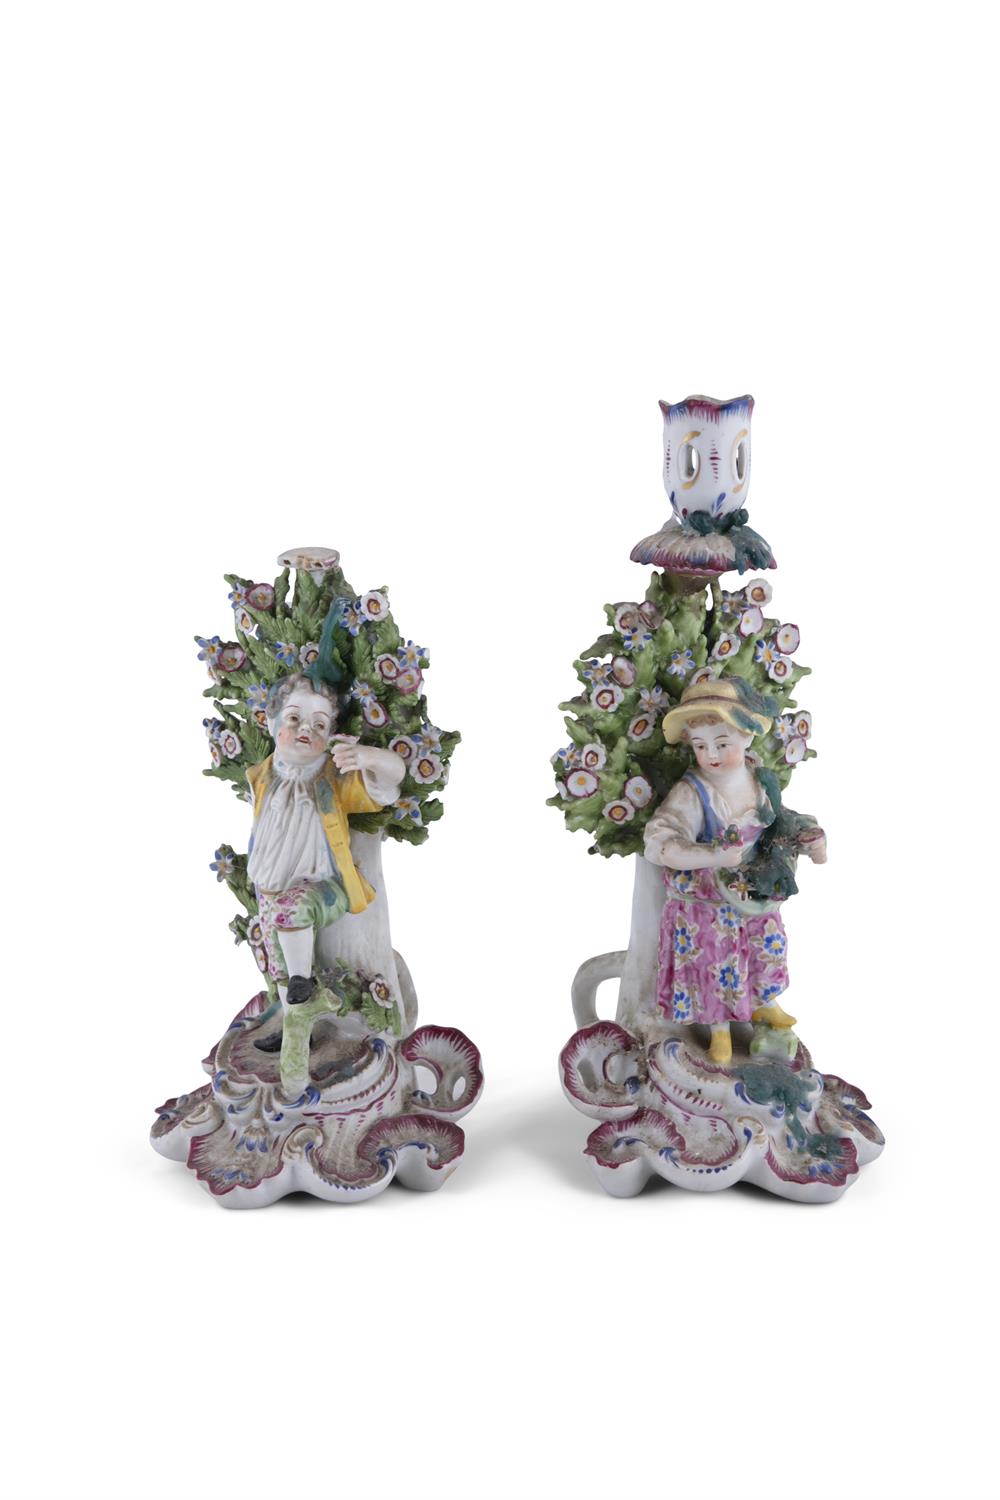 A PAIR OF DERBY FIGURAL CHAMBER CANDLESTICKS, LATE 18TH CENTURY, modelled as a young boy and - Image 4 of 5